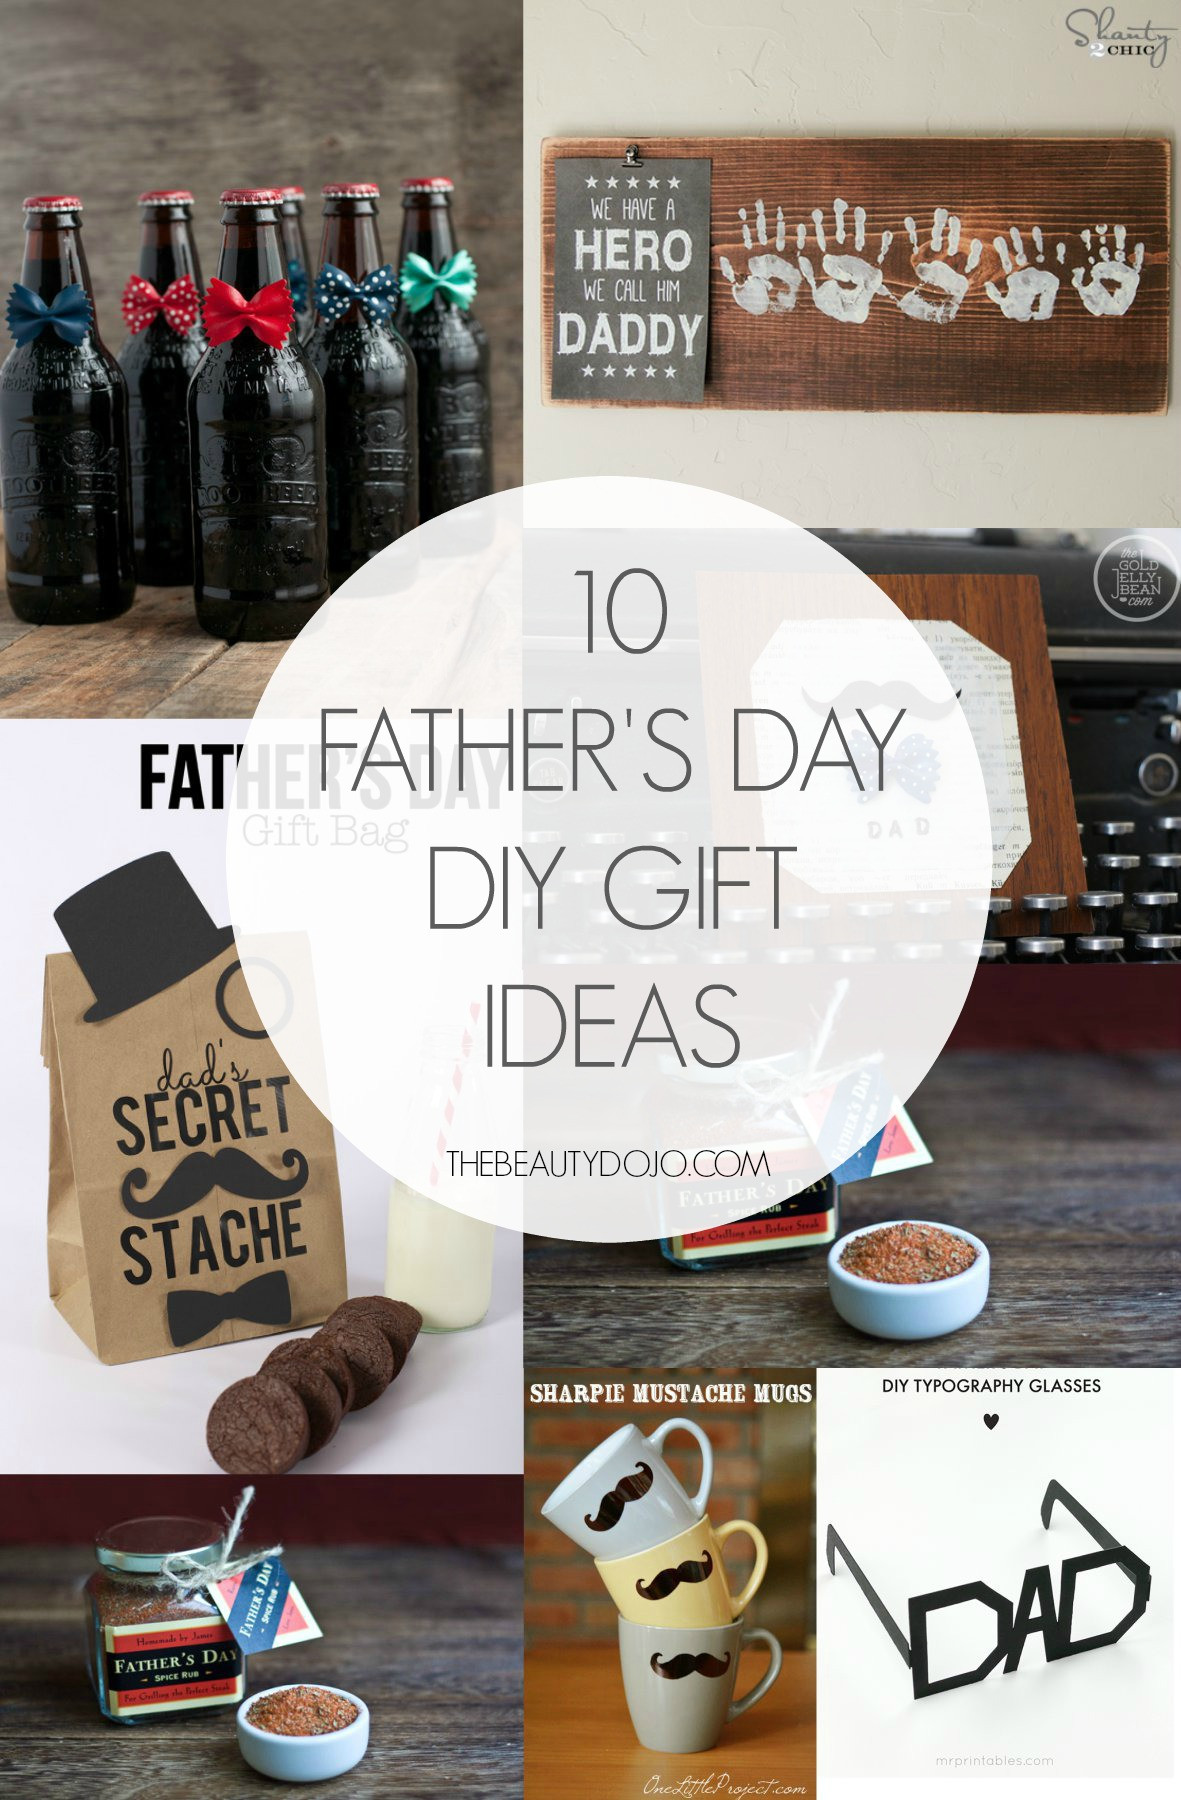 Father'S Day Food Gift Ideas
 10 Father s Day DIY Gift Ideas The Beautydojo